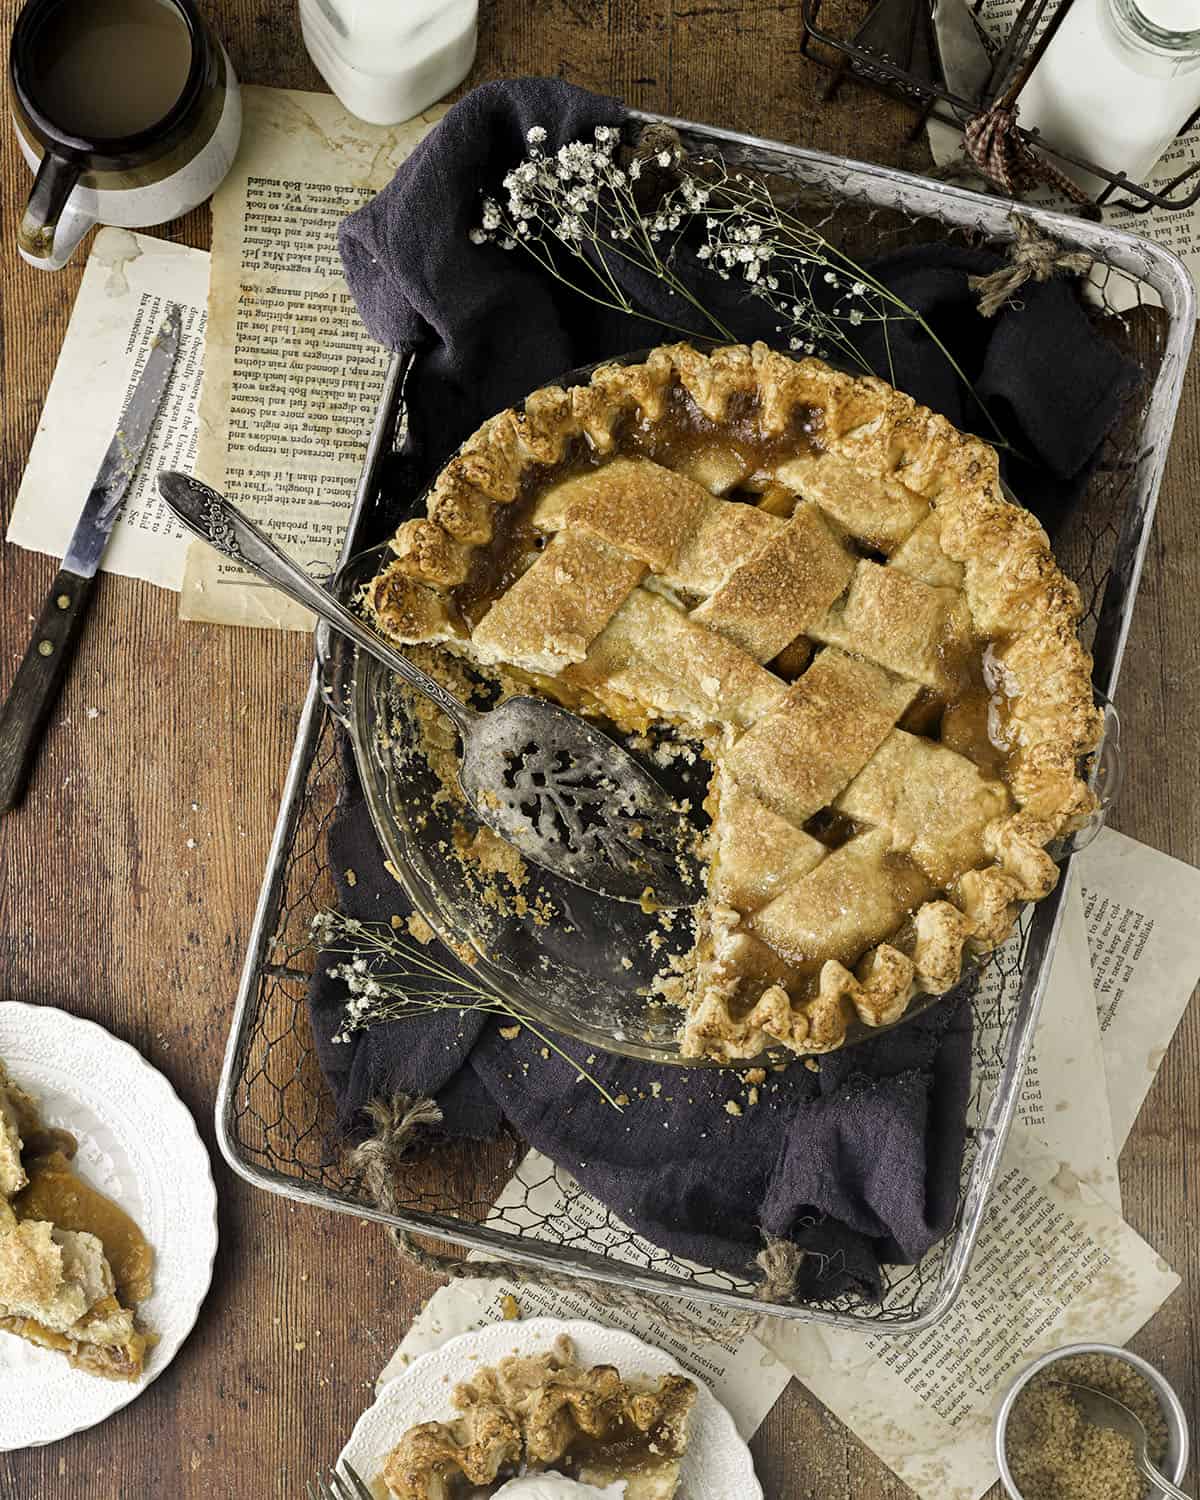 Top view of a cut peach pie in a basket with a dark cloth, flowers, and surrounded by plates of pie and recipe pages. 